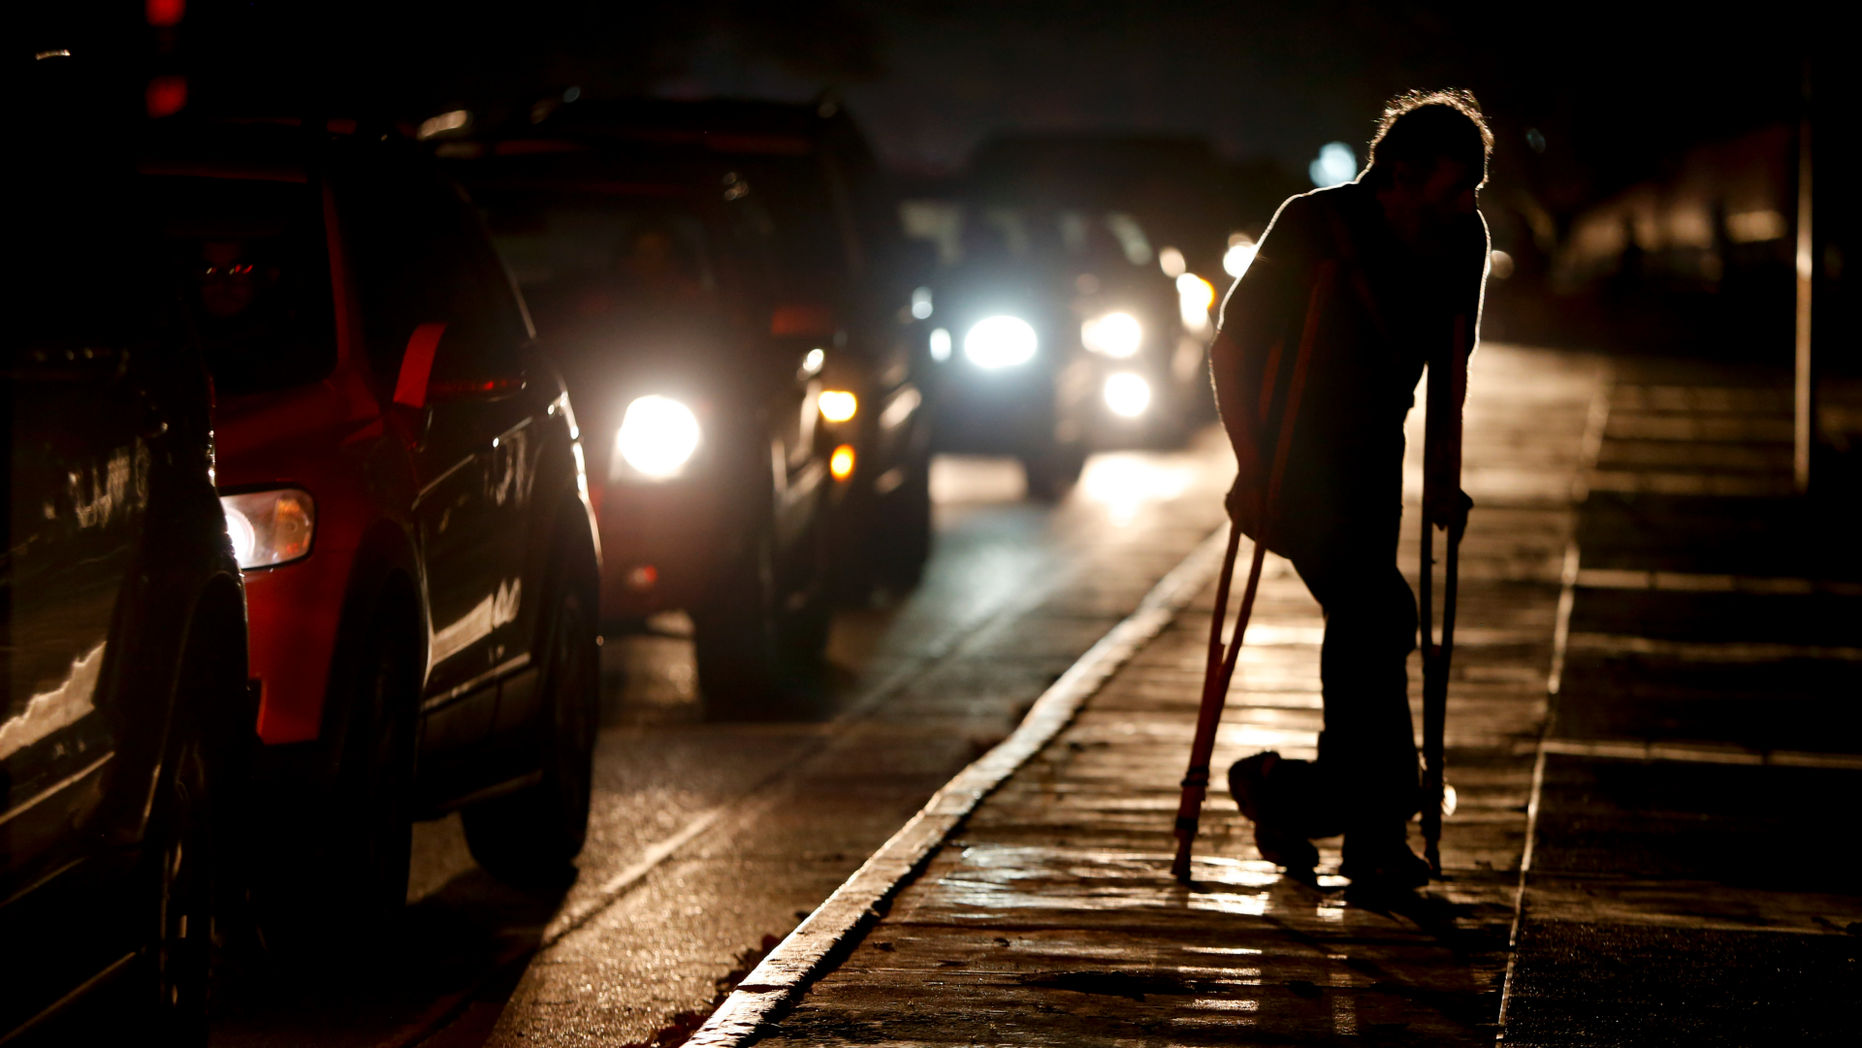 FILE - In this March 29, 2019 file photo, a man on crutches is illuminated by headlights of oncoming traffic, in Caracas, Venezuela. Venezuelans are struggling to understand the Sunday, March 31, 2019 announcement that the nation’s electricity is being rationed to combat daily blackouts.  (AP Photo/Natacha Pisarenko, File)